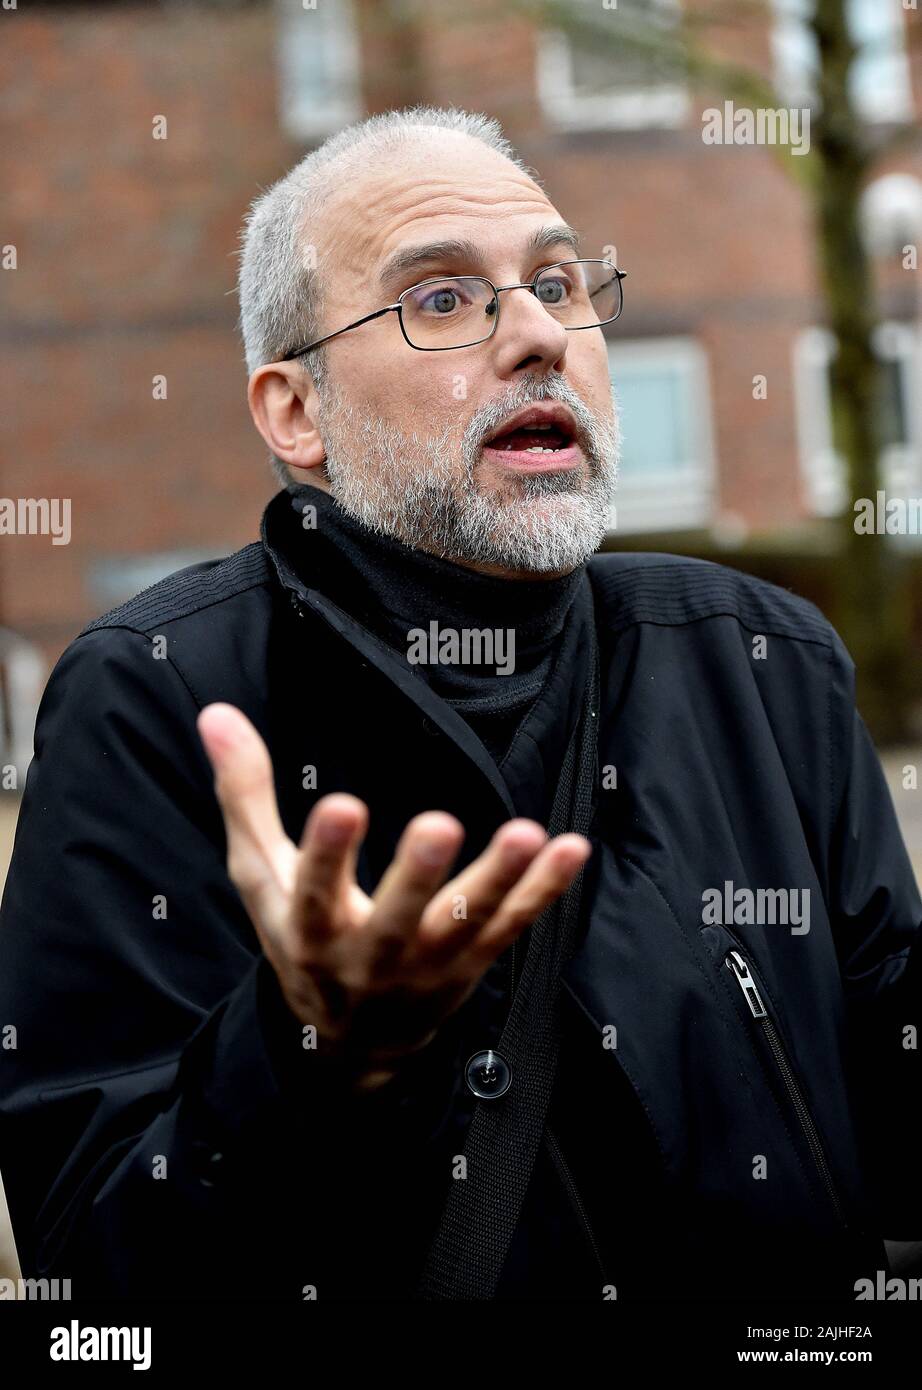 Jordi Casamitjana speaks to the media outside Norwich Magistrates' Court, in Norwich, following an employment tribunal, where tribunal judge Robin Postle, ruled that ethical veganism is a philosophical belief and is therefore a protected characteristic under the Equality Act 2010. PA Photo. Picture date: Friday January 3, 2020. Jordi Casamitjana said he was sacked by the League Against Cruel Sports after raising concerns that its pension fund was being invested into companies involved in animal testing. The 55-year-old, from London, claims he was unfairly disciplined for making this disclosure Stock Photo